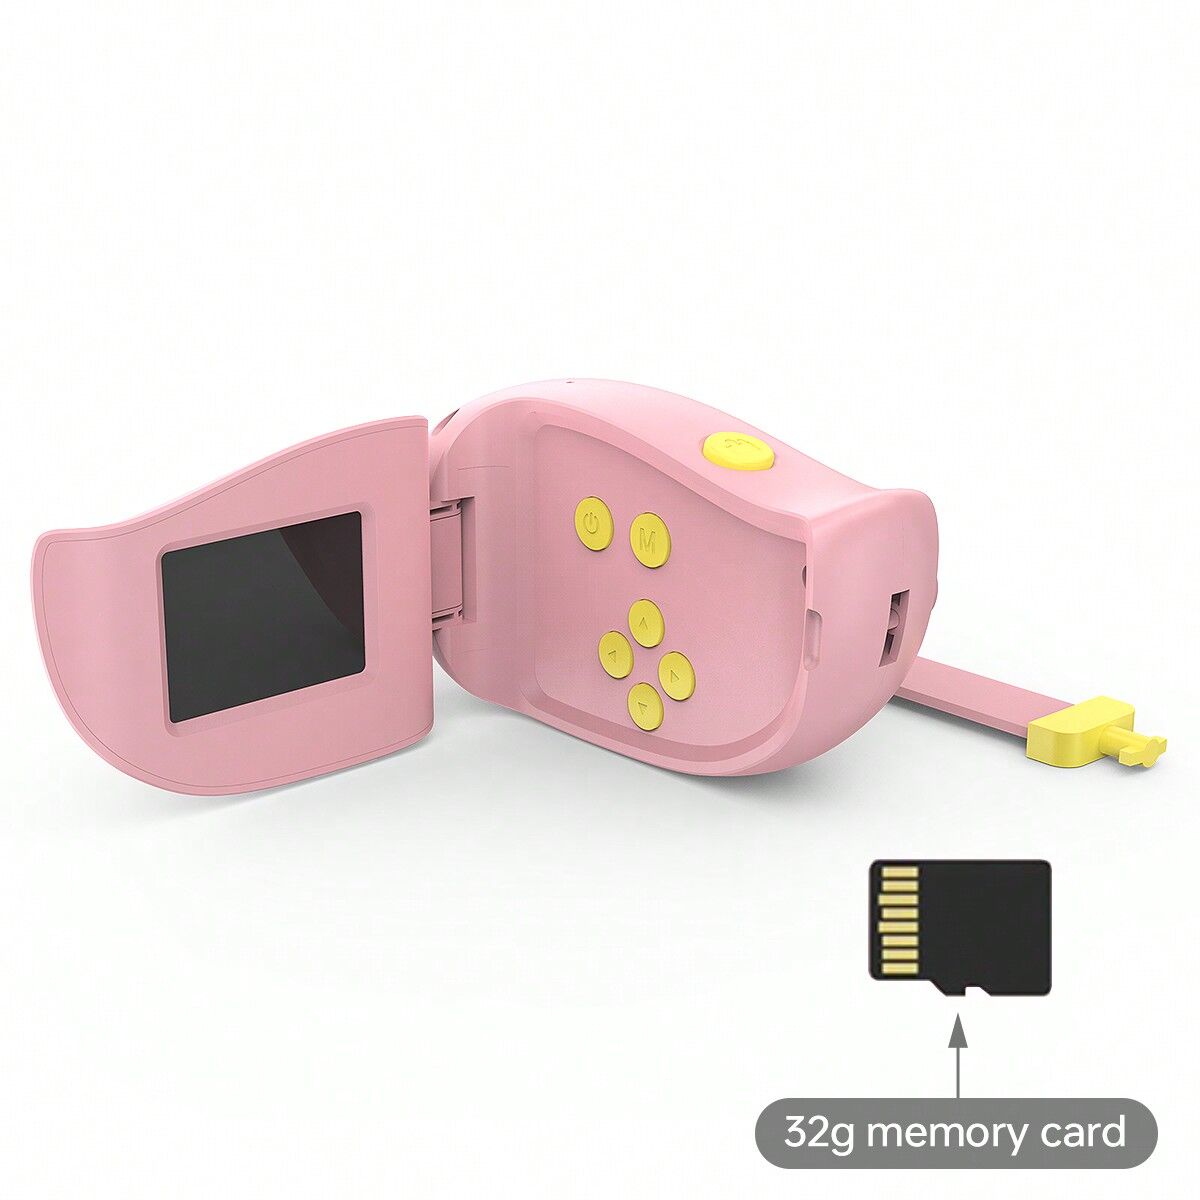 SHEIN Handheld DV camera, high-definition photography and video camera, including 32G memory card set Pink